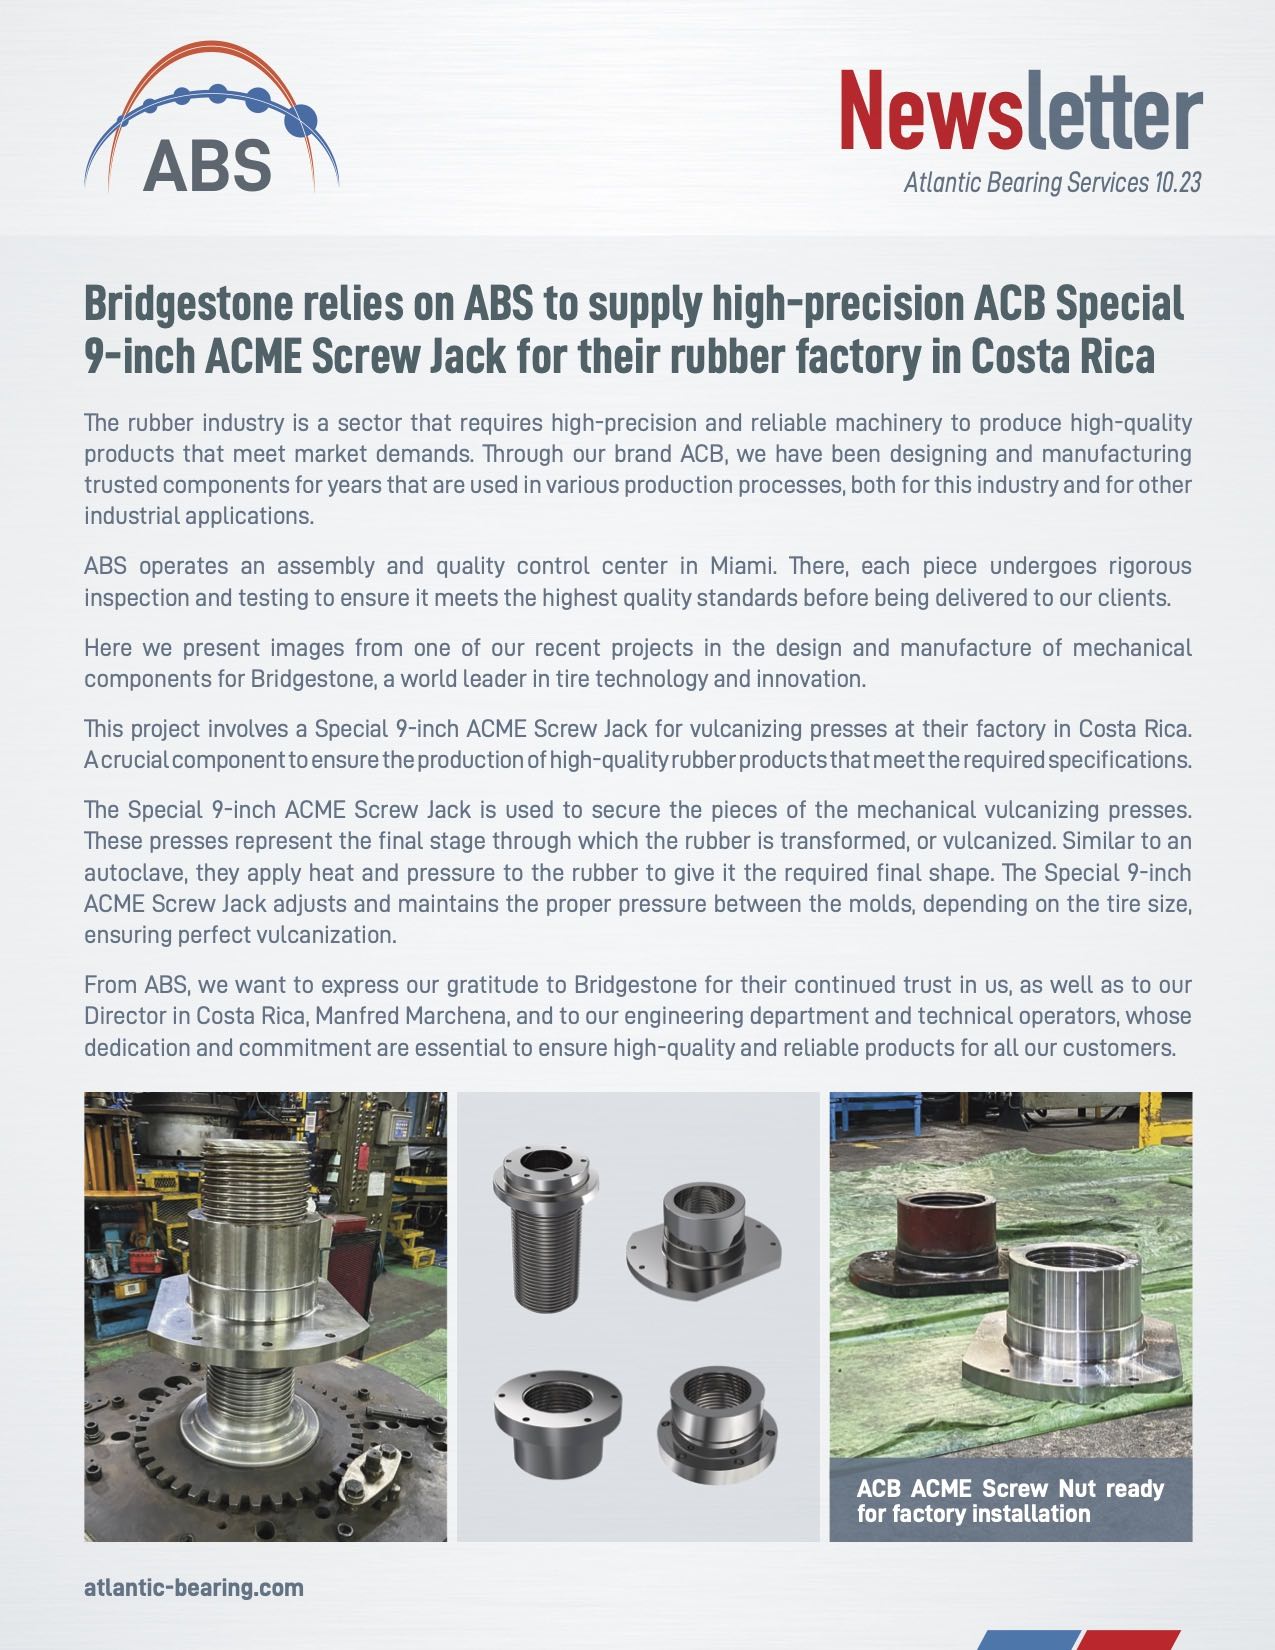 Bridgestone relies on ABS to supply high-precision ACB Special 9-inch ACME Screw Jack for their rubber factory in Costa Rica